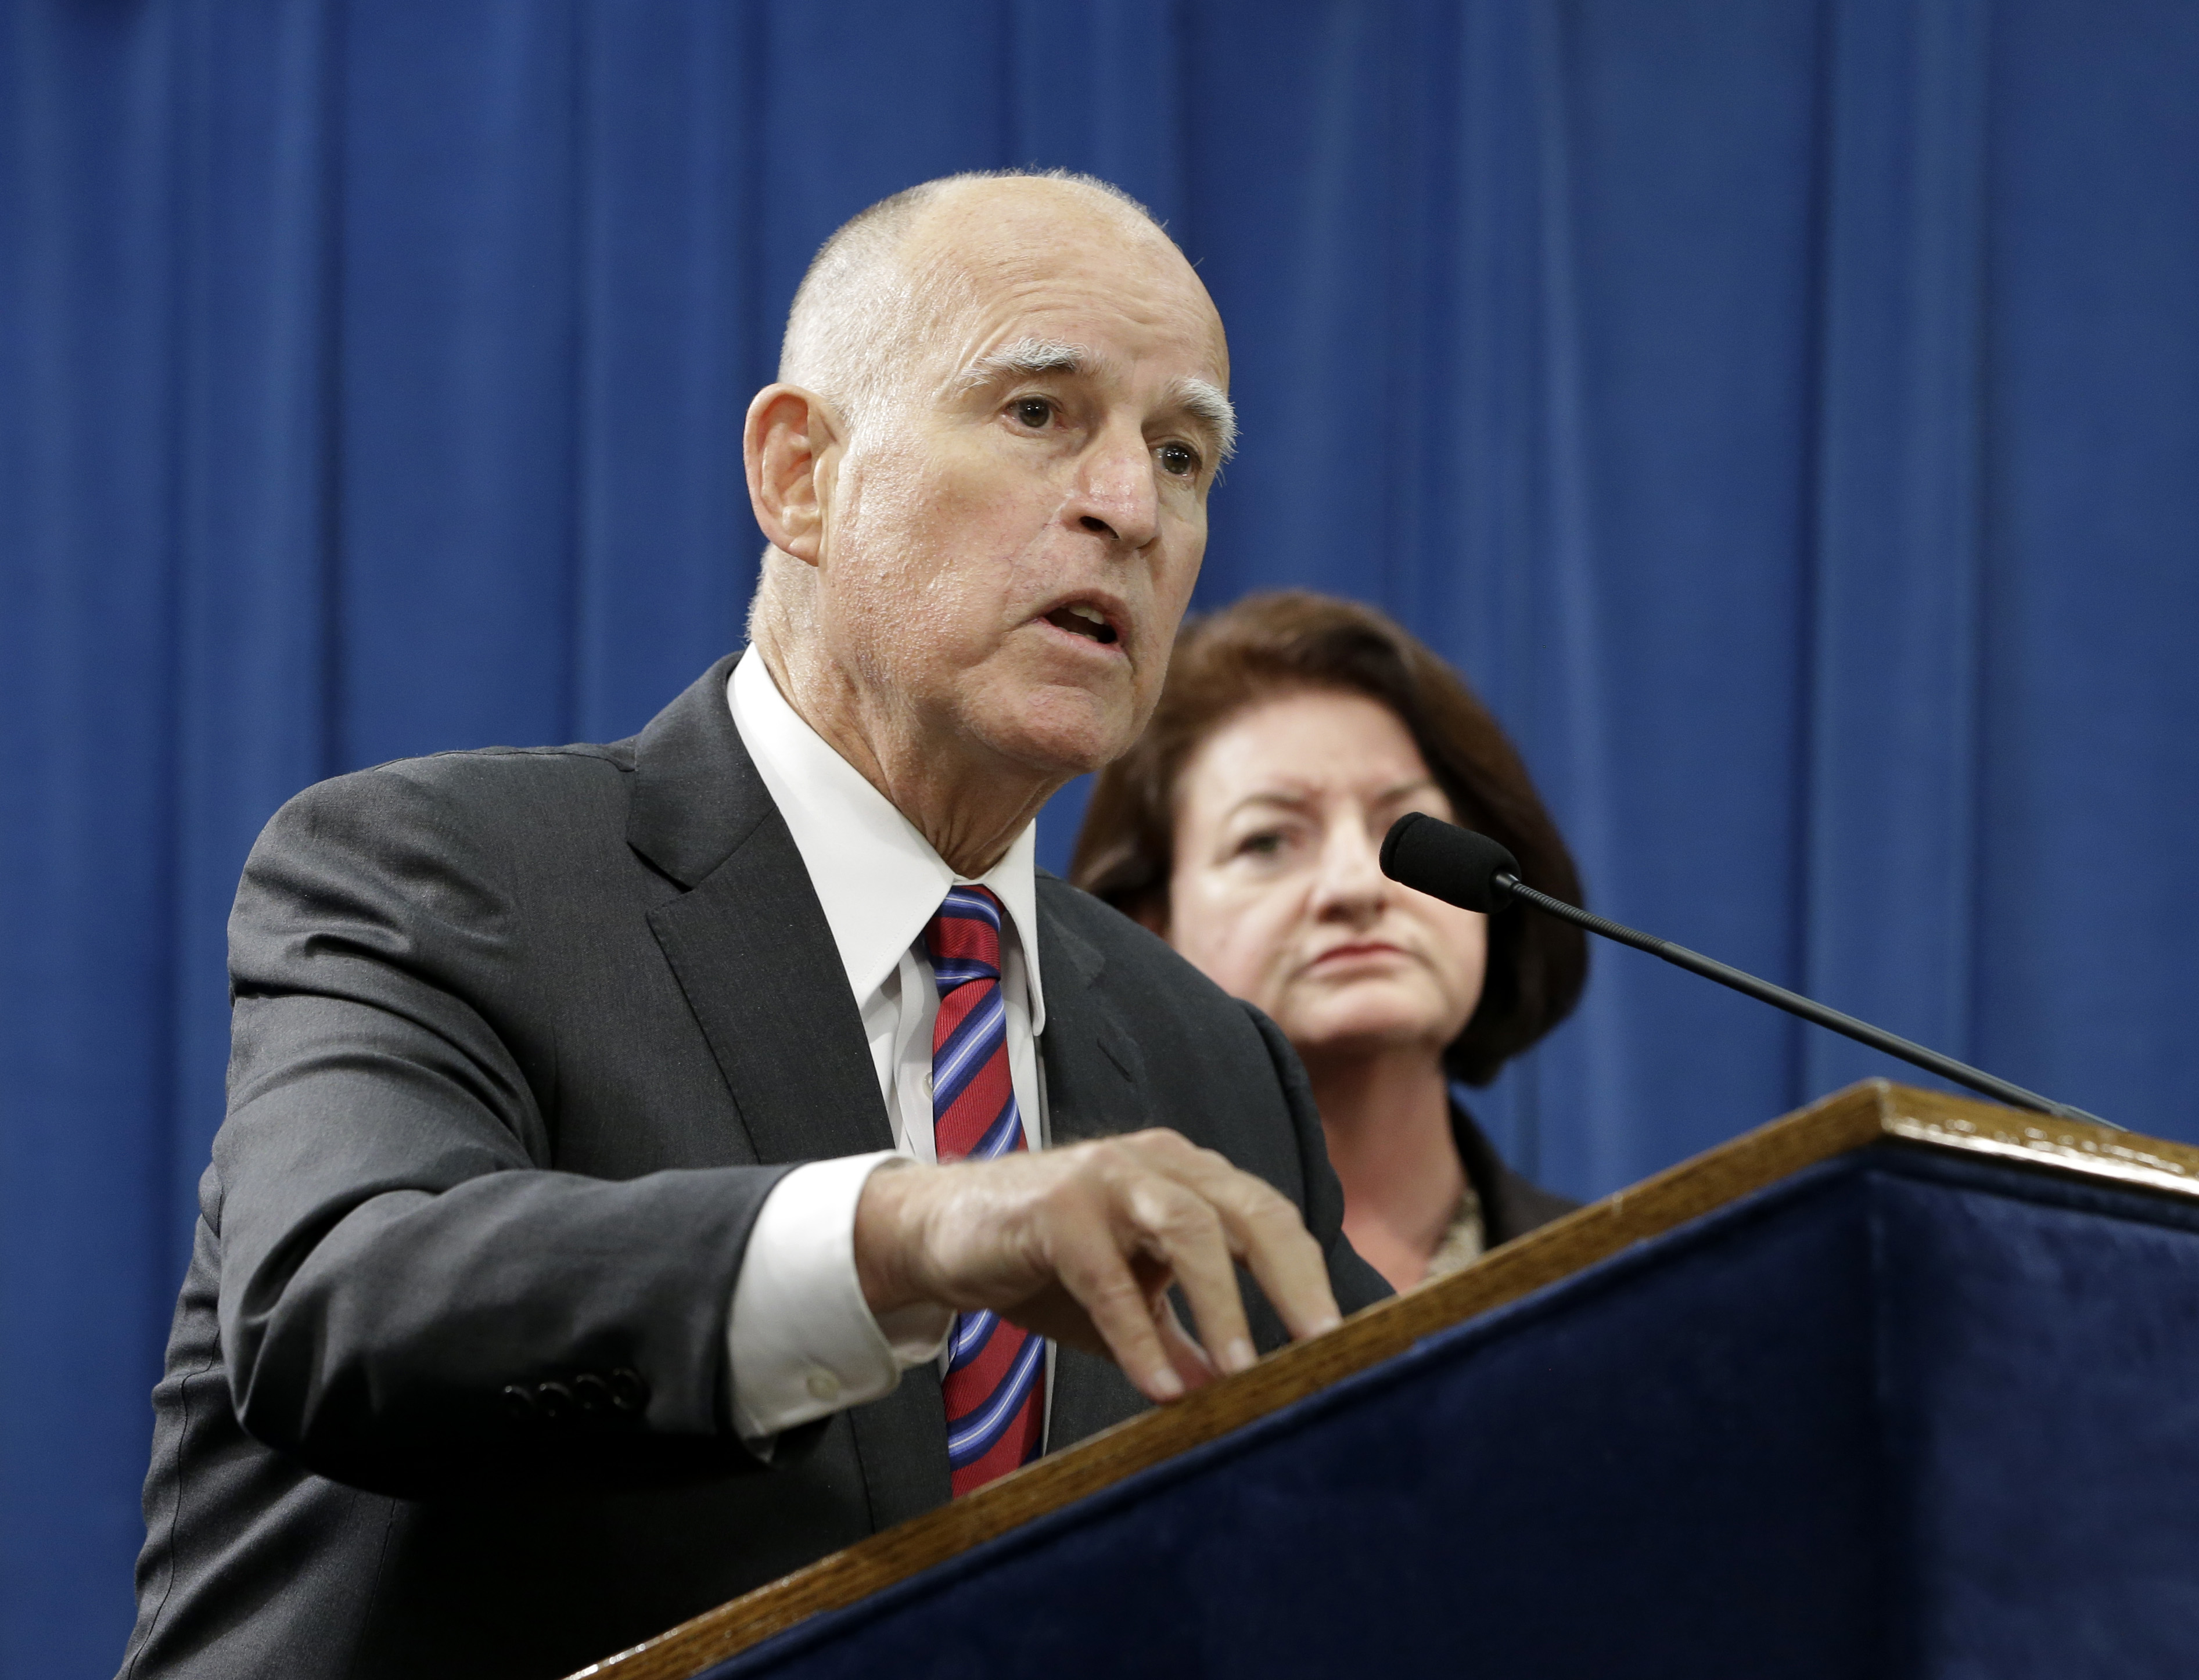 The California Senate approved legislation legalizing aid-in-dying Friday, sending it to the desk of California Gov. Jerry Brown, seen here at a Sept. 9, 2015, news conference in Sacramento, Calif. (Rich Pedroncelli—AP)